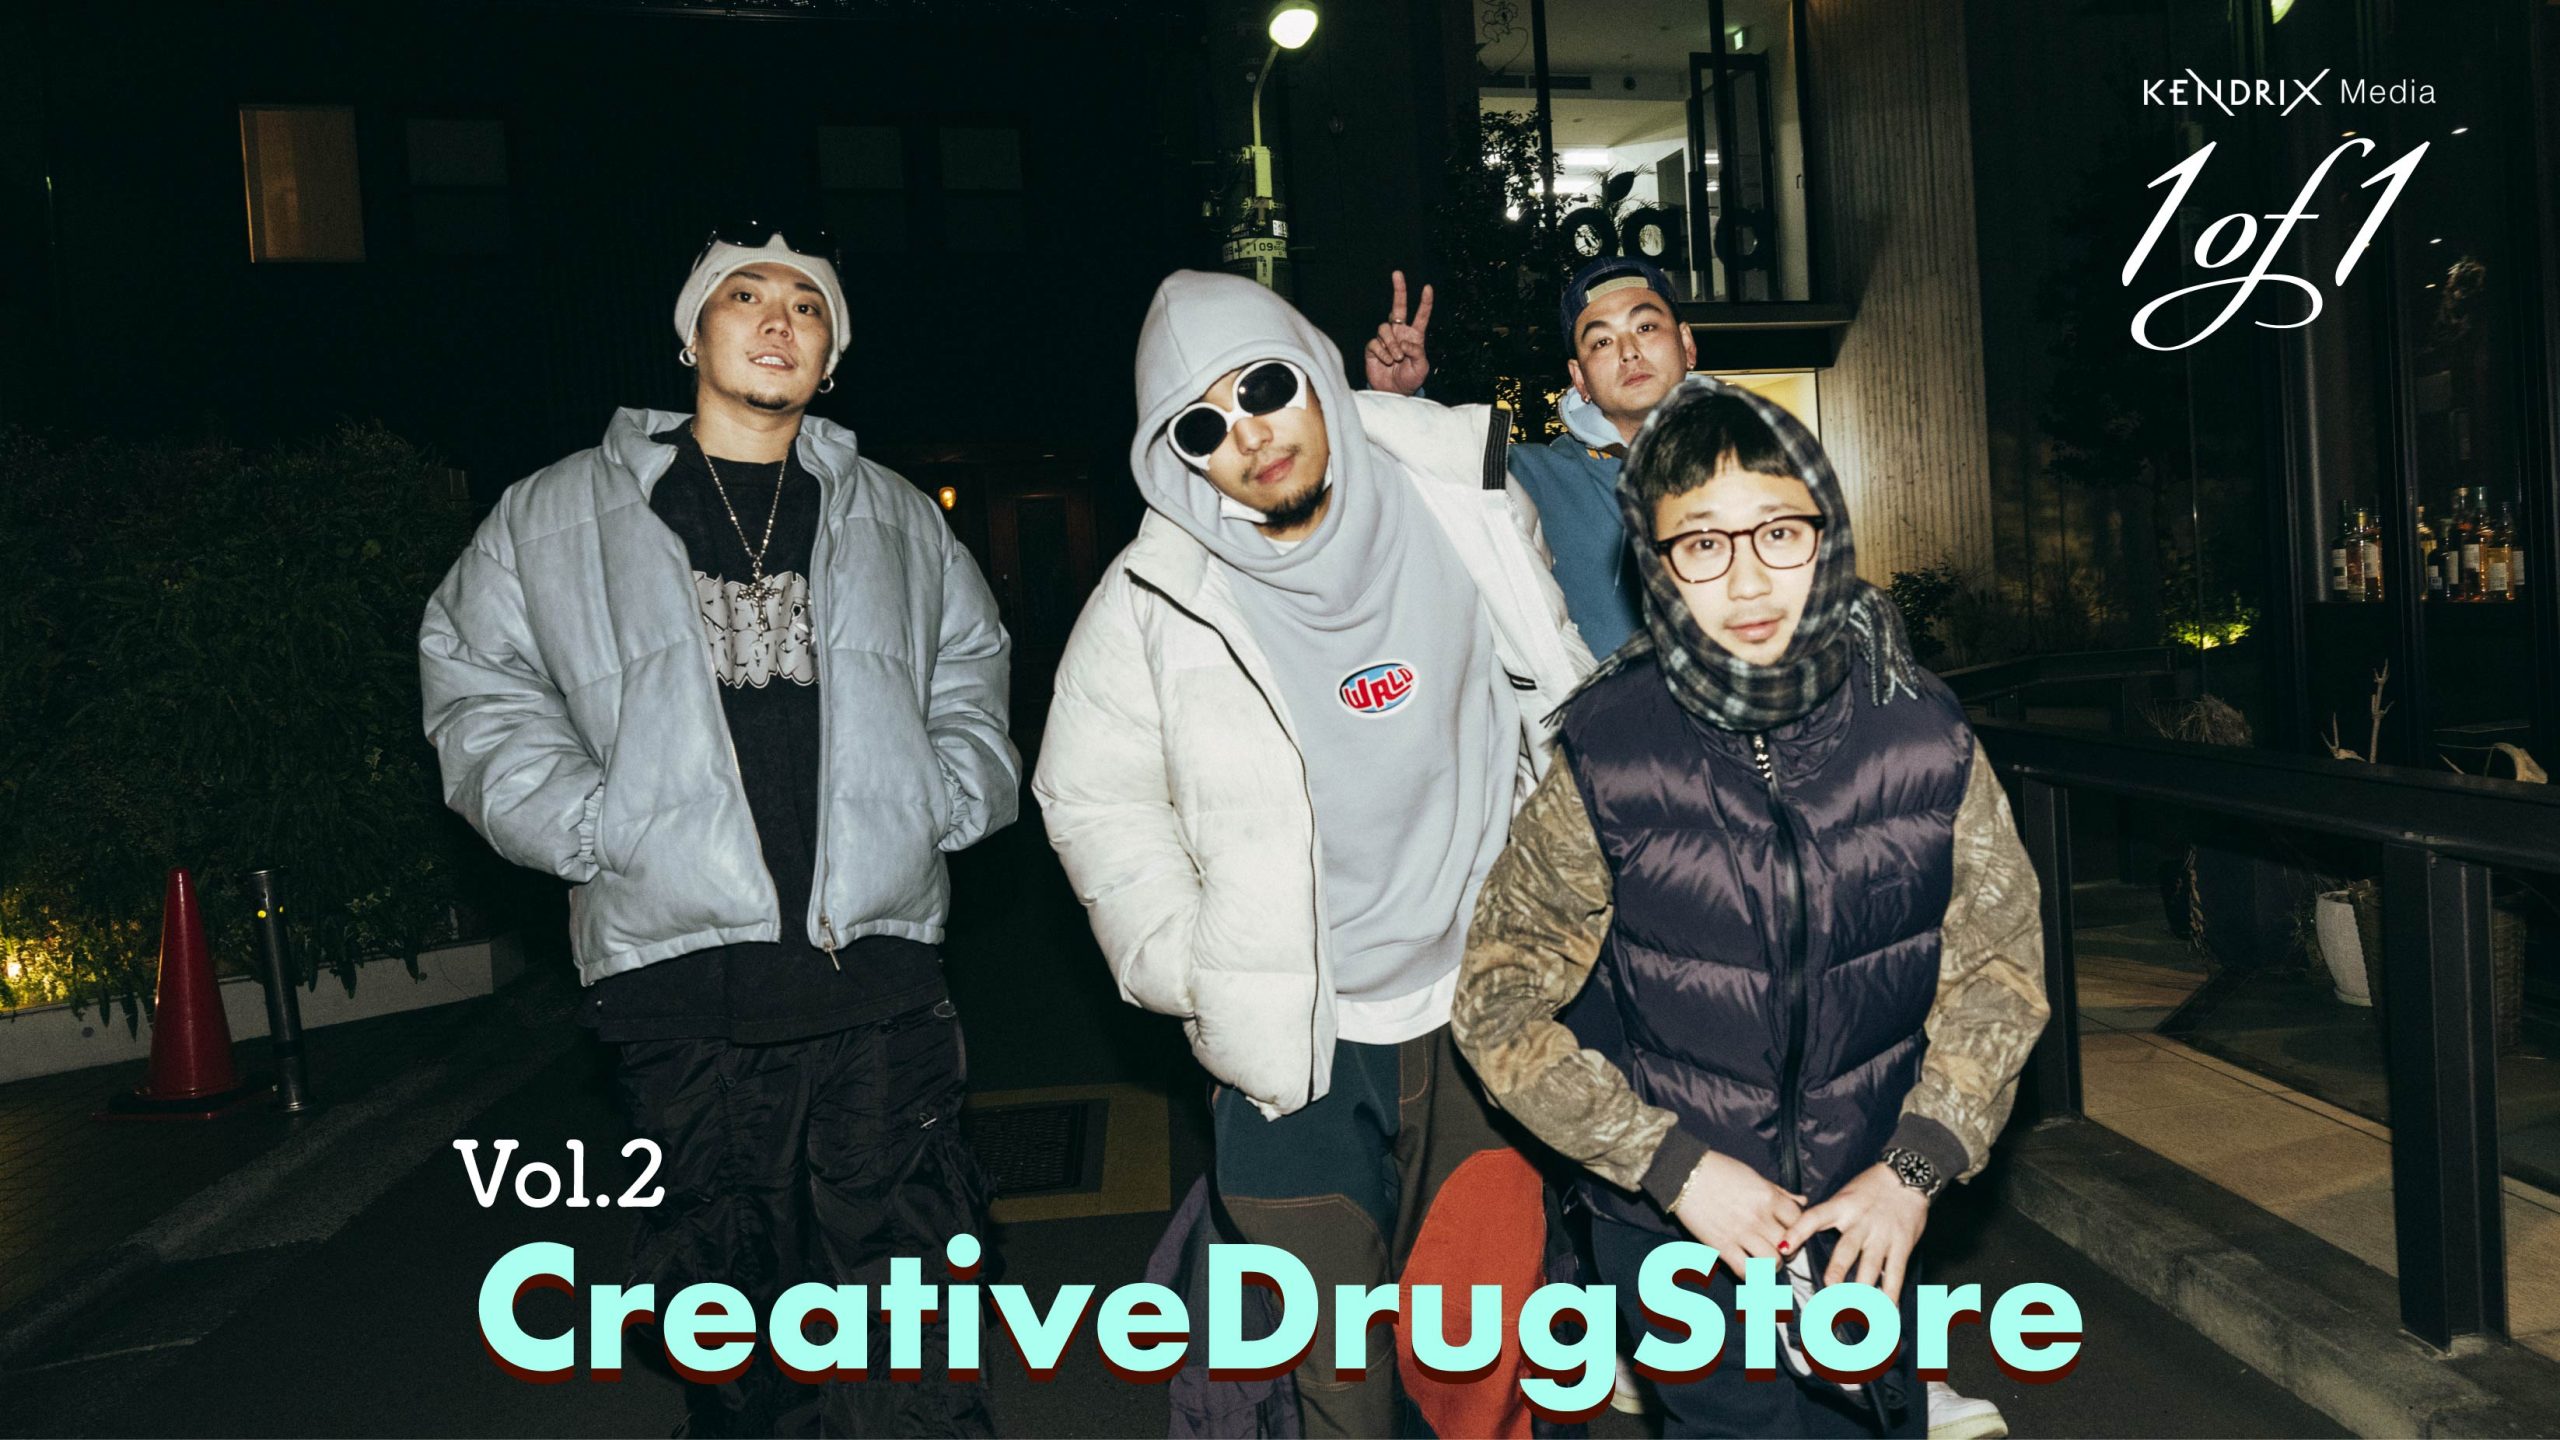 『1of1』 Vol.2 CreativeDrugStore<br>「Wisteria」を作ってみんなとさらに仲良くなれた